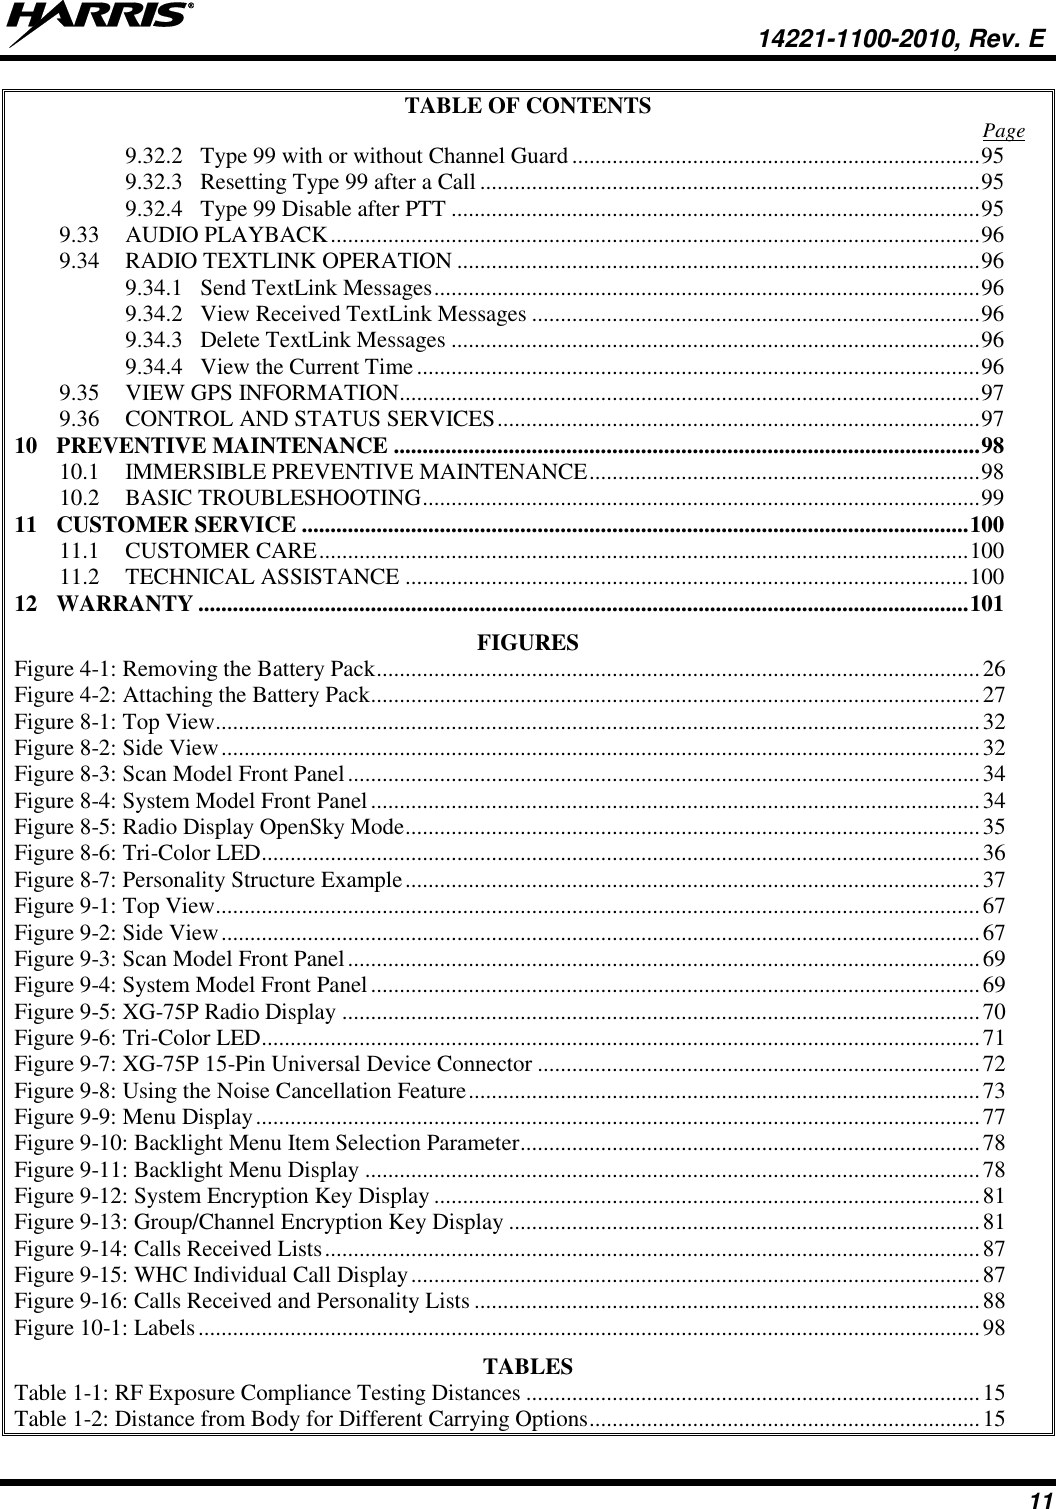   14221-1100-2010, Rev. E 11 TABLE OF CONTENTS  Page 9.32.2 Type 99 with or without Channel Guard ....................................................................... 95 9.32.3 Resetting Type 99 after a Call ....................................................................................... 95 9.32.4 Type 99 Disable after PTT ............................................................................................ 95 9.33 AUDIO PLAYBACK ................................................................................................................. 96 9.34 RADIO TEXTLINK OPERATION ........................................................................................... 96 9.34.1 Send TextLink Messages ............................................................................................... 96 9.34.2 View Received TextLink Messages .............................................................................. 96 9.34.3 Delete TextLink Messages ............................................................................................ 96 9.34.4 View the Current Time .................................................................................................. 96 9.35 VIEW GPS INFORMATION ..................................................................................................... 97 9.36 CONTROL AND STATUS SERVICES .................................................................................... 97 10 PREVENTIVE MAINTENANCE ...................................................................................................... 98 10.1 IMMERSIBLE PREVENTIVE MAINTENANCE .................................................................... 98 10.2 BASIC TROUBLESHOOTING ................................................................................................. 99 11 CUSTOMER SERVICE .................................................................................................................... 100 11.1 CUSTOMER CARE ................................................................................................................. 100 11.2 TECHNICAL ASSISTANCE .................................................................................................. 100 12 WARRANTY ...................................................................................................................................... 101 FIGURES Figure 4-1: Removing the Battery Pack ......................................................................................................... 26 Figure 4-2: Attaching the Battery Pack .......................................................................................................... 27 Figure 8-1: Top View ..................................................................................................................................... 32 Figure 8-2: Side View .................................................................................................................................... 32 Figure 8-3: Scan Model Front Panel .............................................................................................................. 34 Figure 8-4: System Model Front Panel .......................................................................................................... 34 Figure 8-5: Radio Display OpenSky Mode .................................................................................................... 35 Figure 8-6: Tri-Color LED ............................................................................................................................. 36 Figure 8-7: Personality Structure Example .................................................................................................... 37 Figure 9-1: Top View ..................................................................................................................................... 67 Figure 9-2: Side View .................................................................................................................................... 67 Figure 9-3: Scan Model Front Panel .............................................................................................................. 69 Figure 9-4: System Model Front Panel .......................................................................................................... 69 Figure 9-5: XG-75P Radio Display ............................................................................................................... 70 Figure 9-6: Tri-Color LED ............................................................................................................................. 71 Figure 9-7: XG-75P 15-Pin Universal Device Connector ............................................................................. 72 Figure 9-8: Using the Noise Cancellation Feature ......................................................................................... 73 Figure 9-9: Menu Display .............................................................................................................................. 77 Figure 9-10: Backlight Menu Item Selection Parameter ................................................................................ 78 Figure 9-11: Backlight Menu Display ........................................................................................................... 78 Figure 9-12: System Encryption Key Display ............................................................................................... 81 Figure 9-13: Group/Channel Encryption Key Display .................................................................................. 81 Figure 9-14: Calls Received Lists .................................................................................................................. 87 Figure 9-15: WHC Individual Call Display ................................................................................................... 87 Figure 9-16: Calls Received and Personality Lists ........................................................................................ 88 Figure 10-1: Labels ........................................................................................................................................ 98 TABLES Table 1-1: RF Exposure Compliance Testing Distances ............................................................................... 15 Table 1-2: Distance from Body for Different Carrying Options .................................................................... 15 